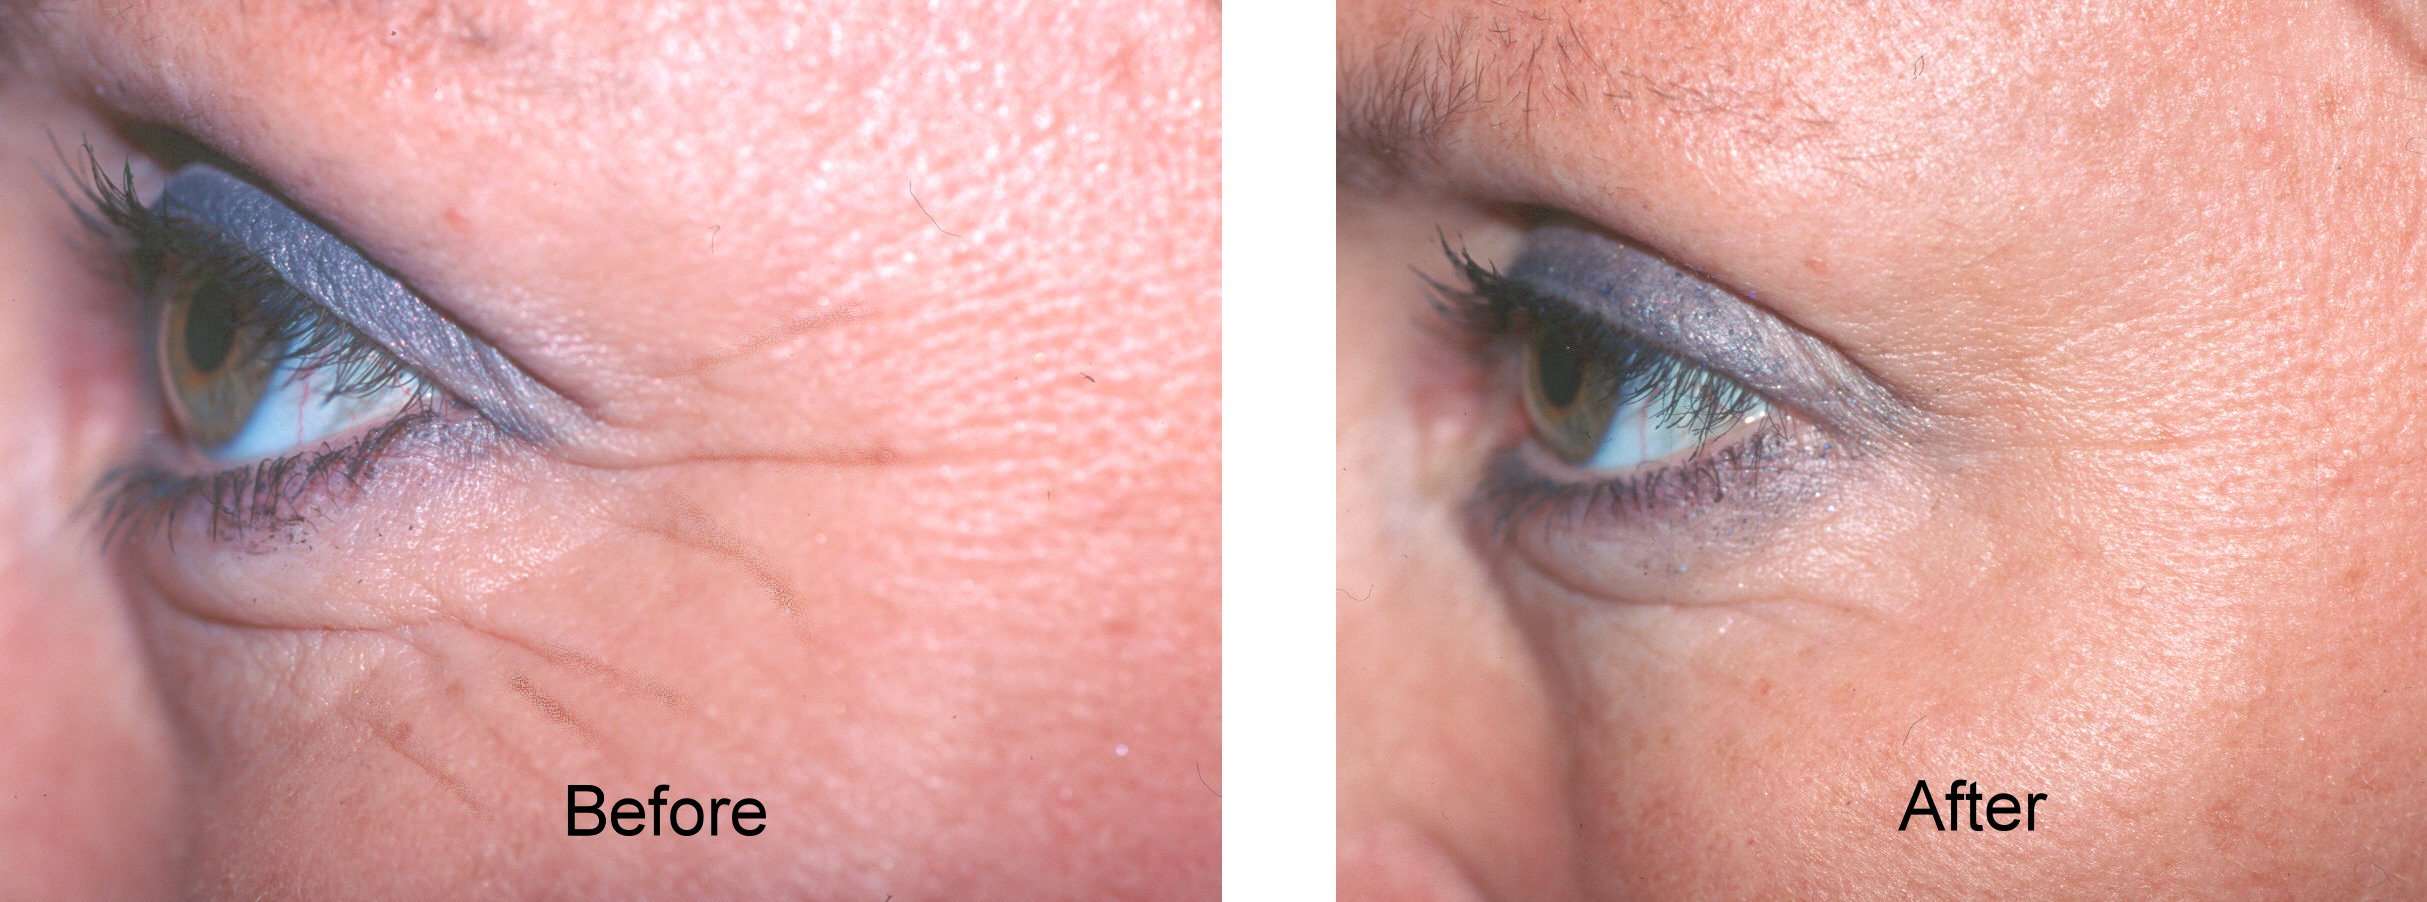 before and after Botox and Dysport treatment for crow's feet